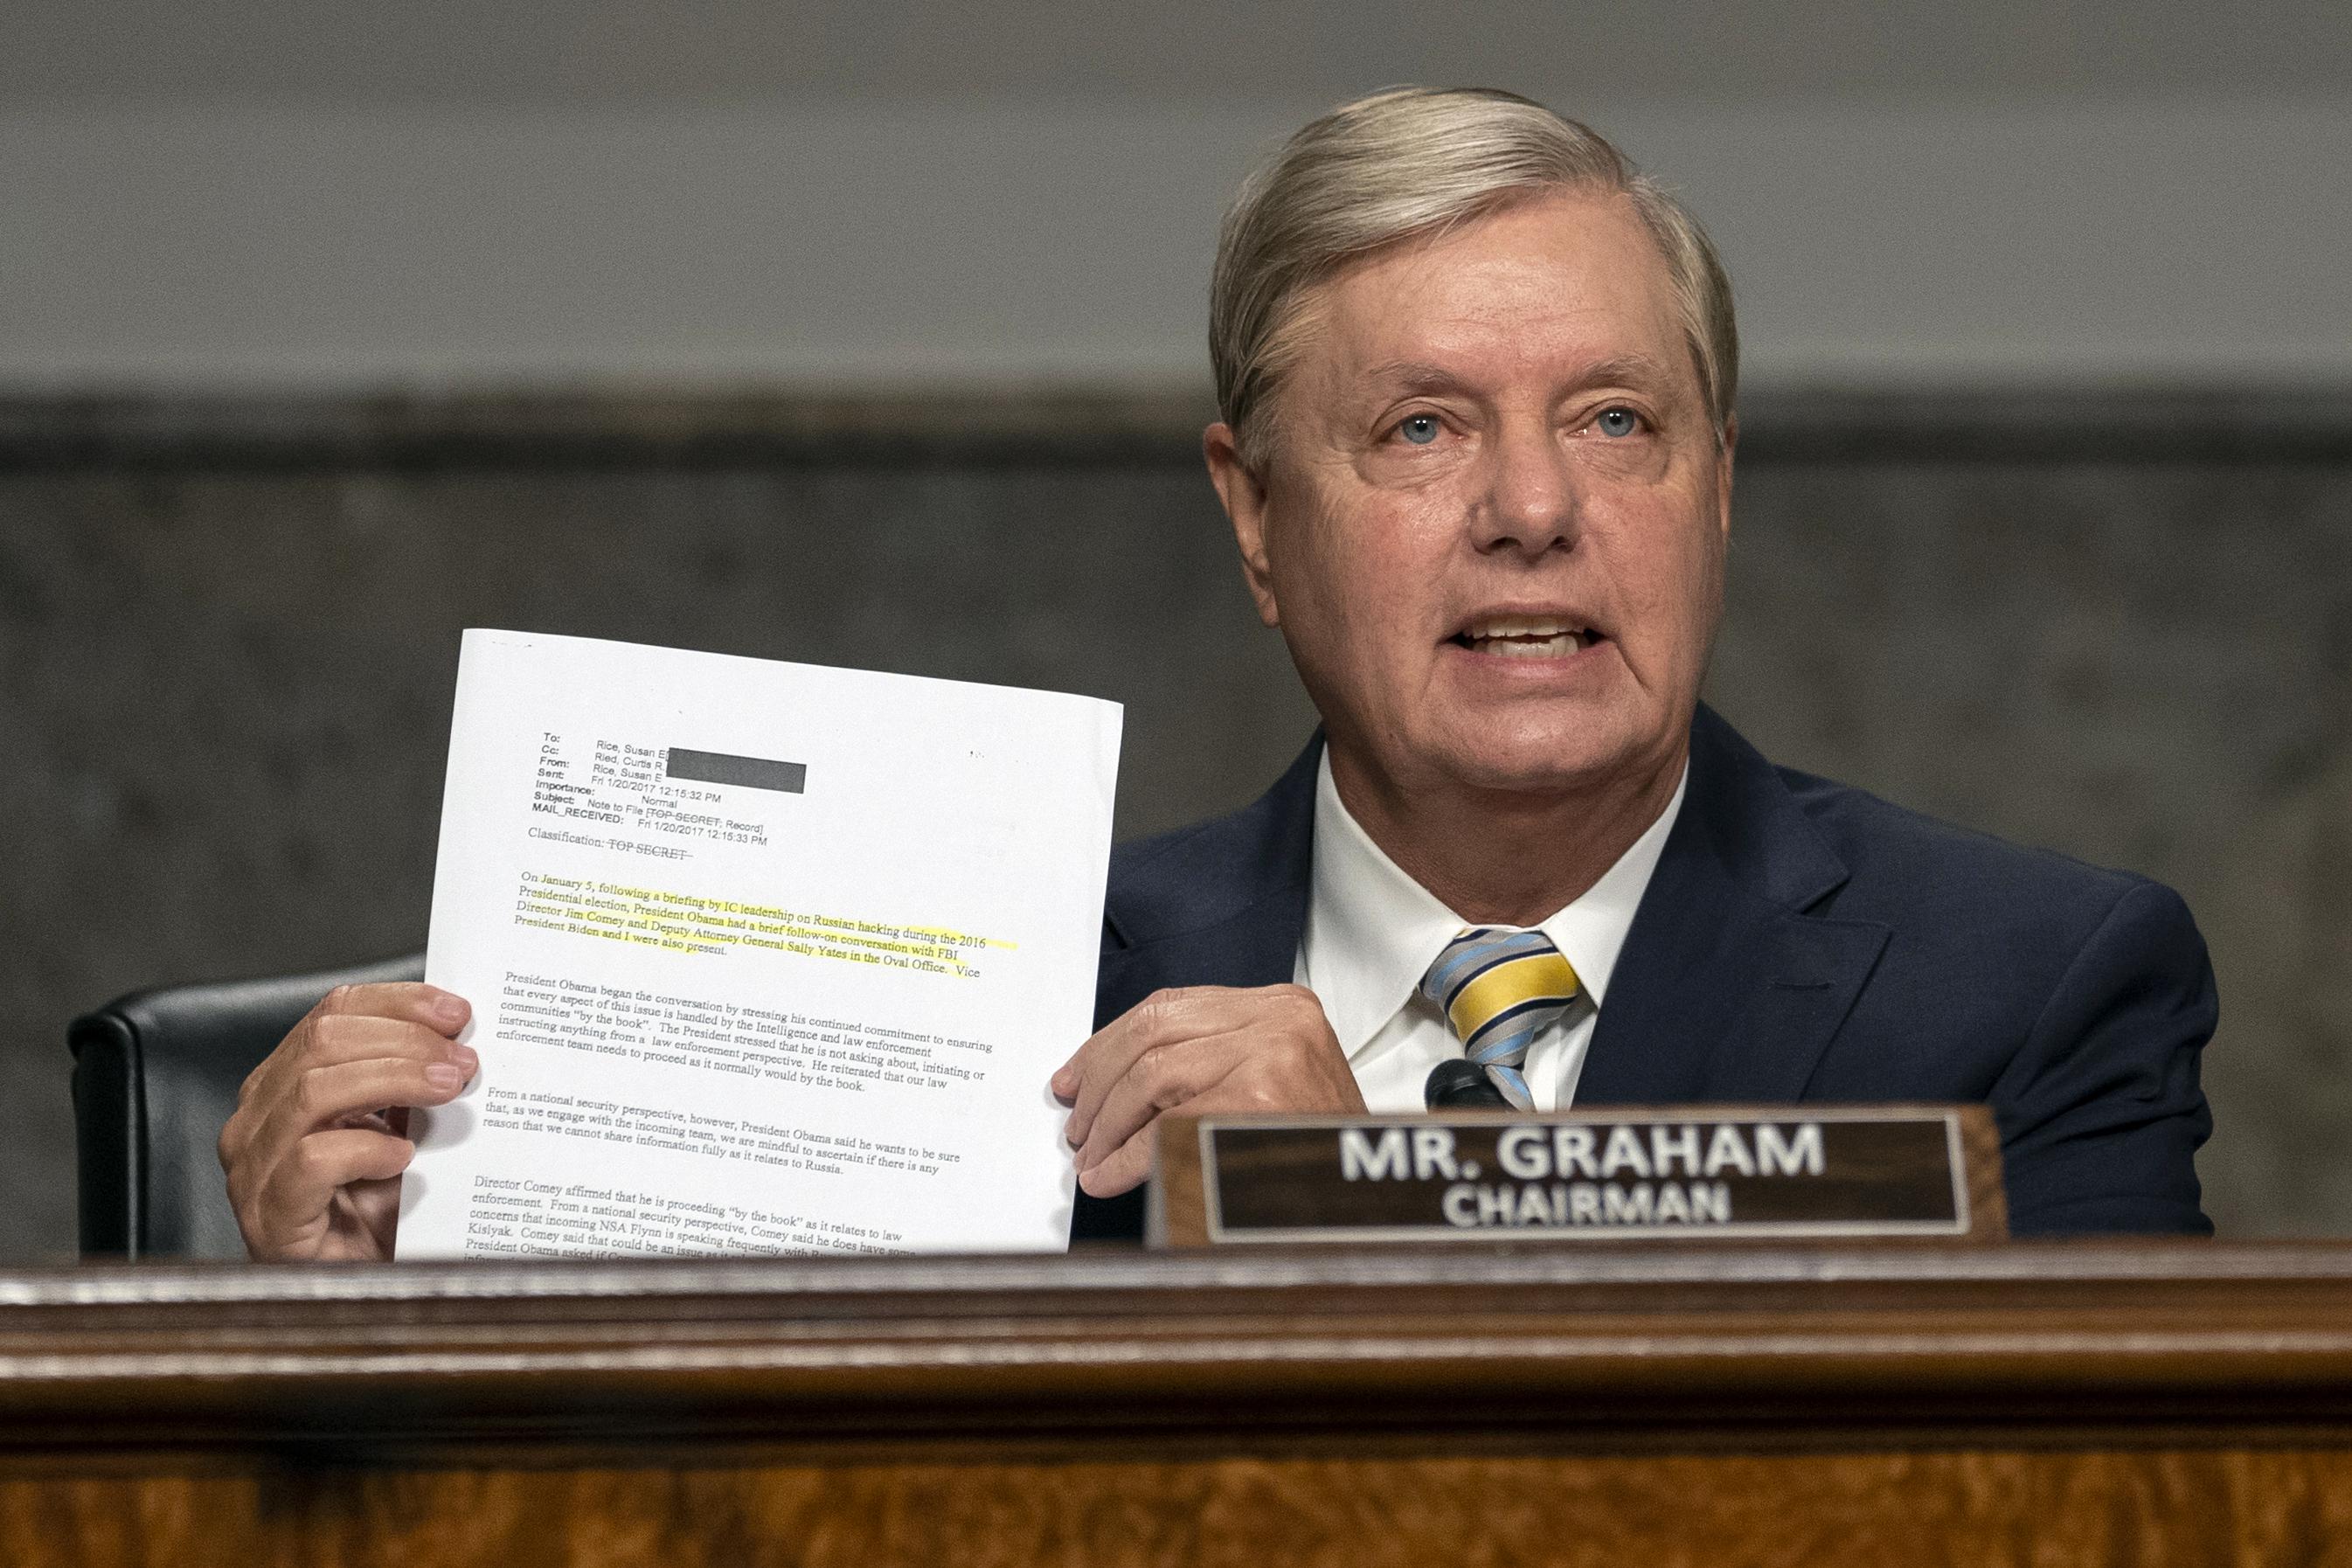 Lindsey Graham holds up a memo at a hearing.